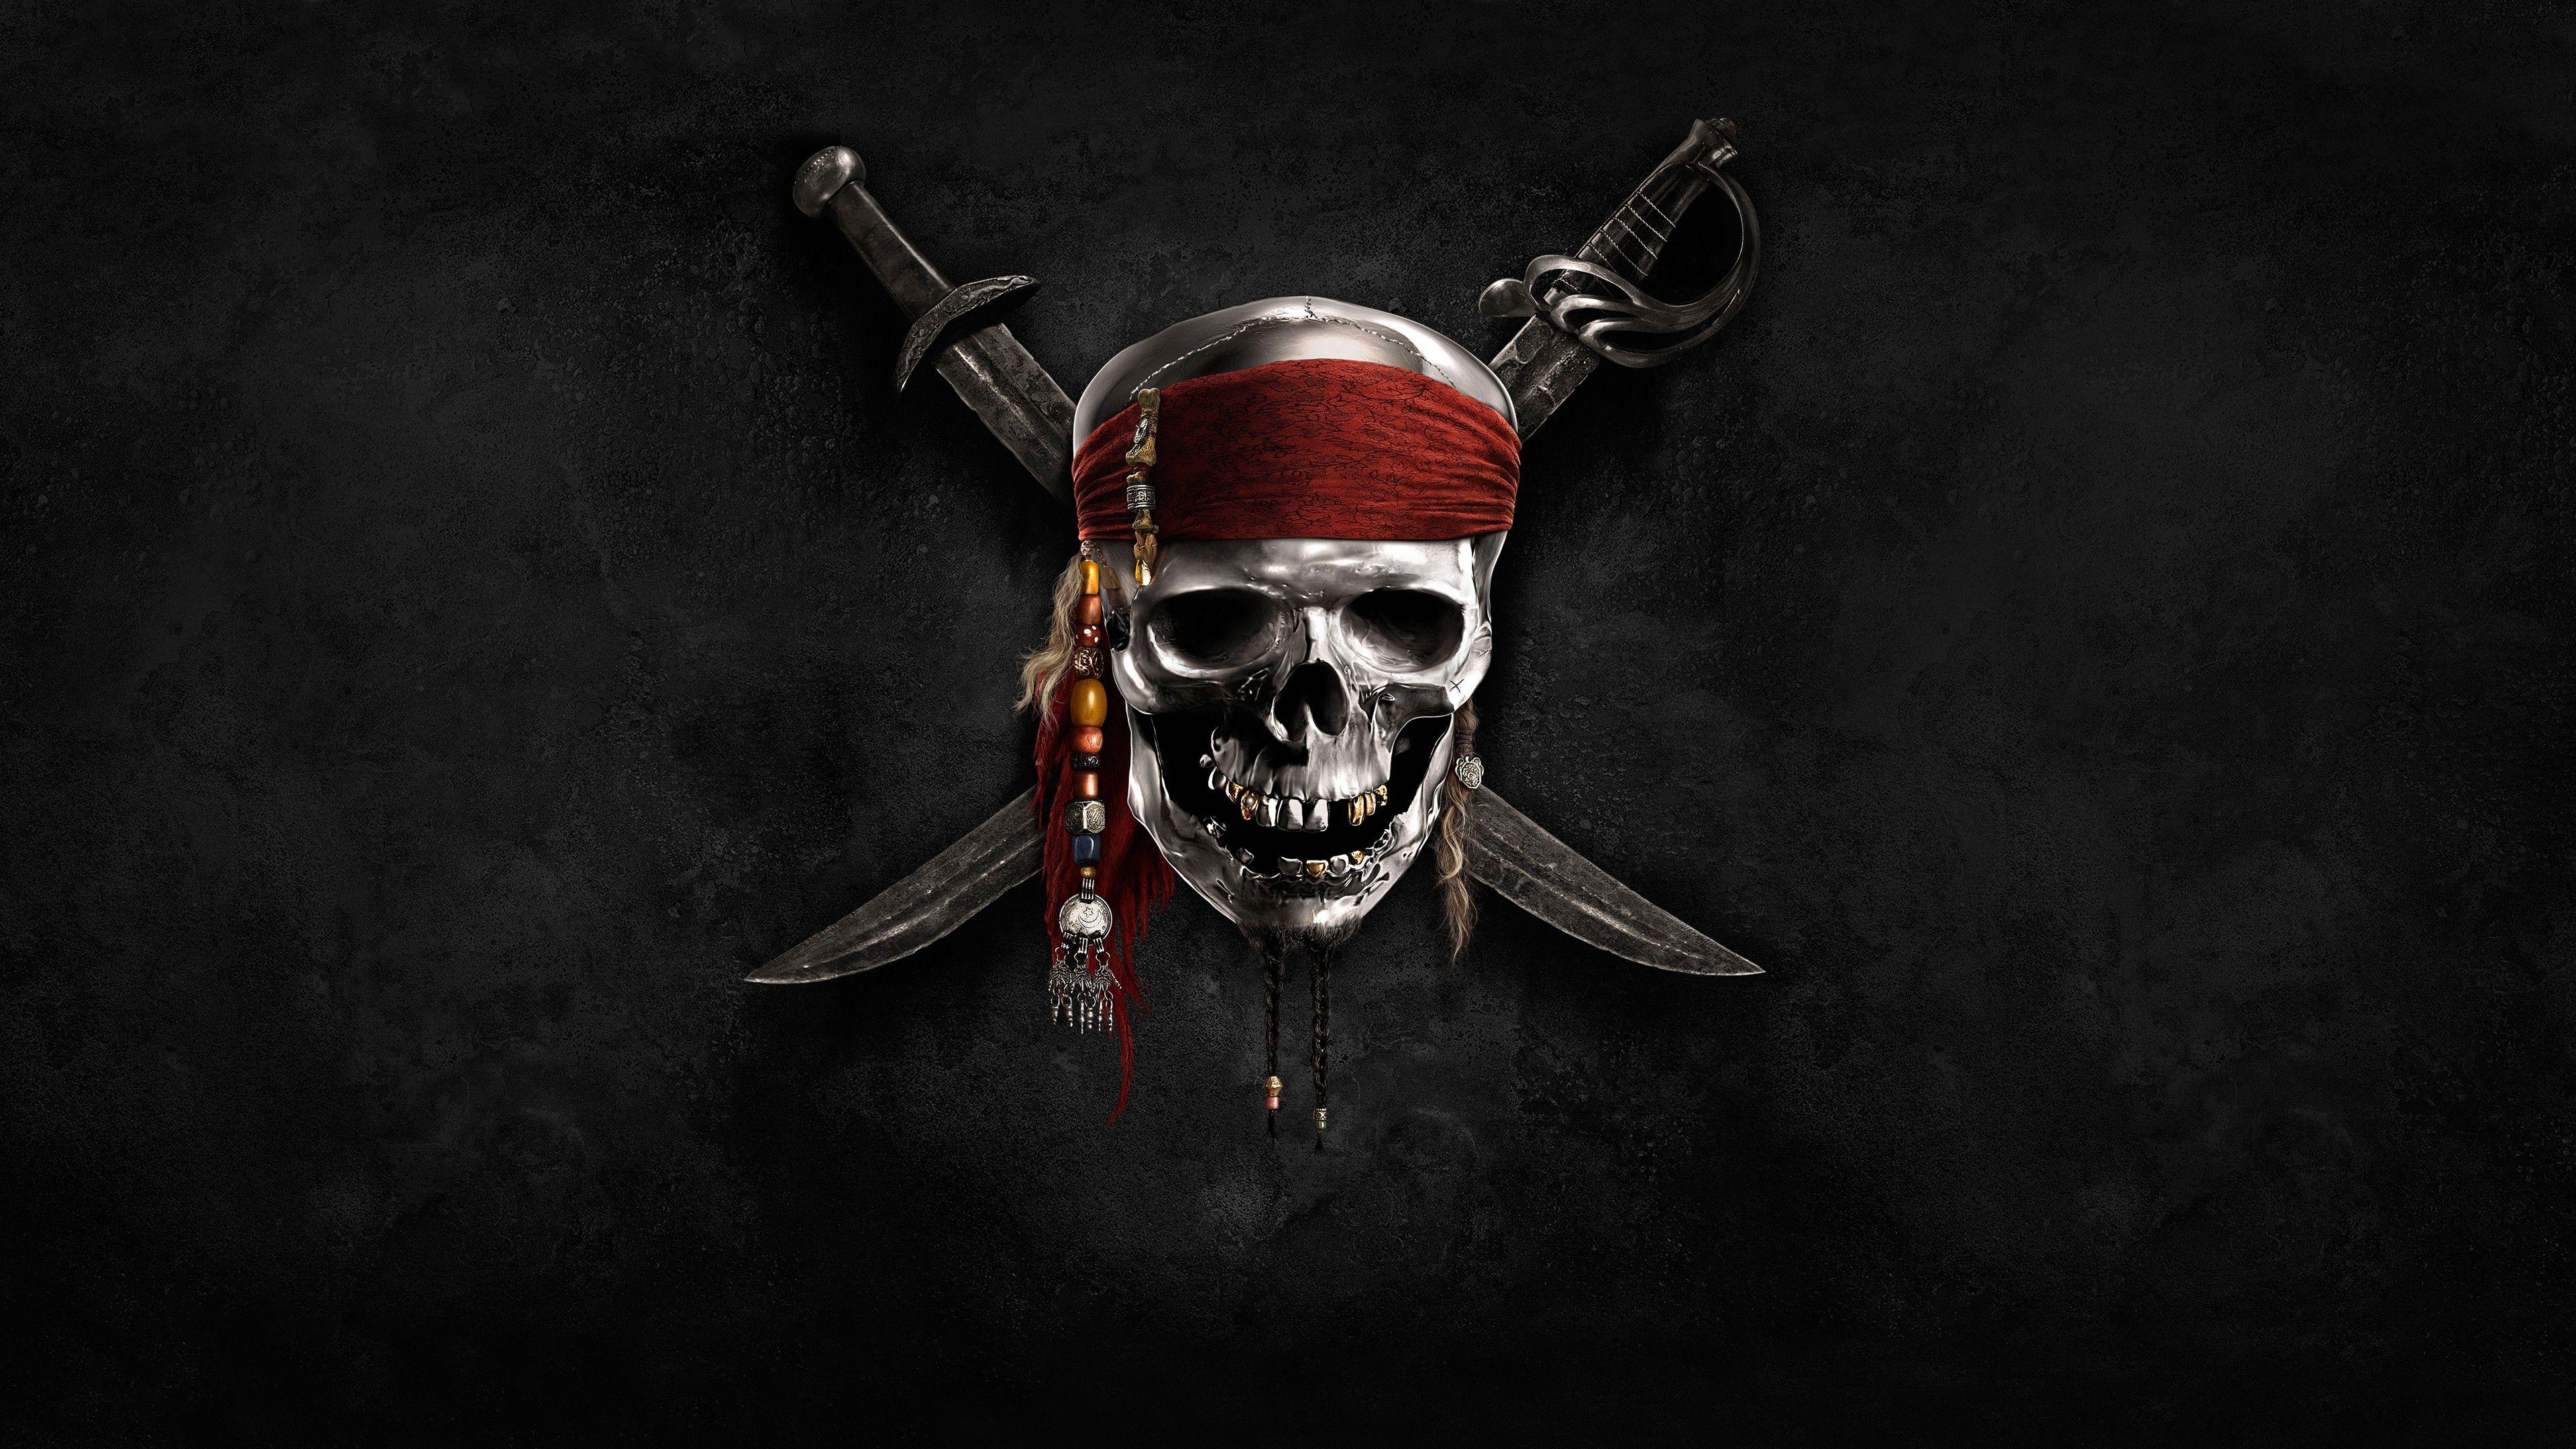 Top 999+ Pirate Wallpaper Full HD, 4K✓Free to Use